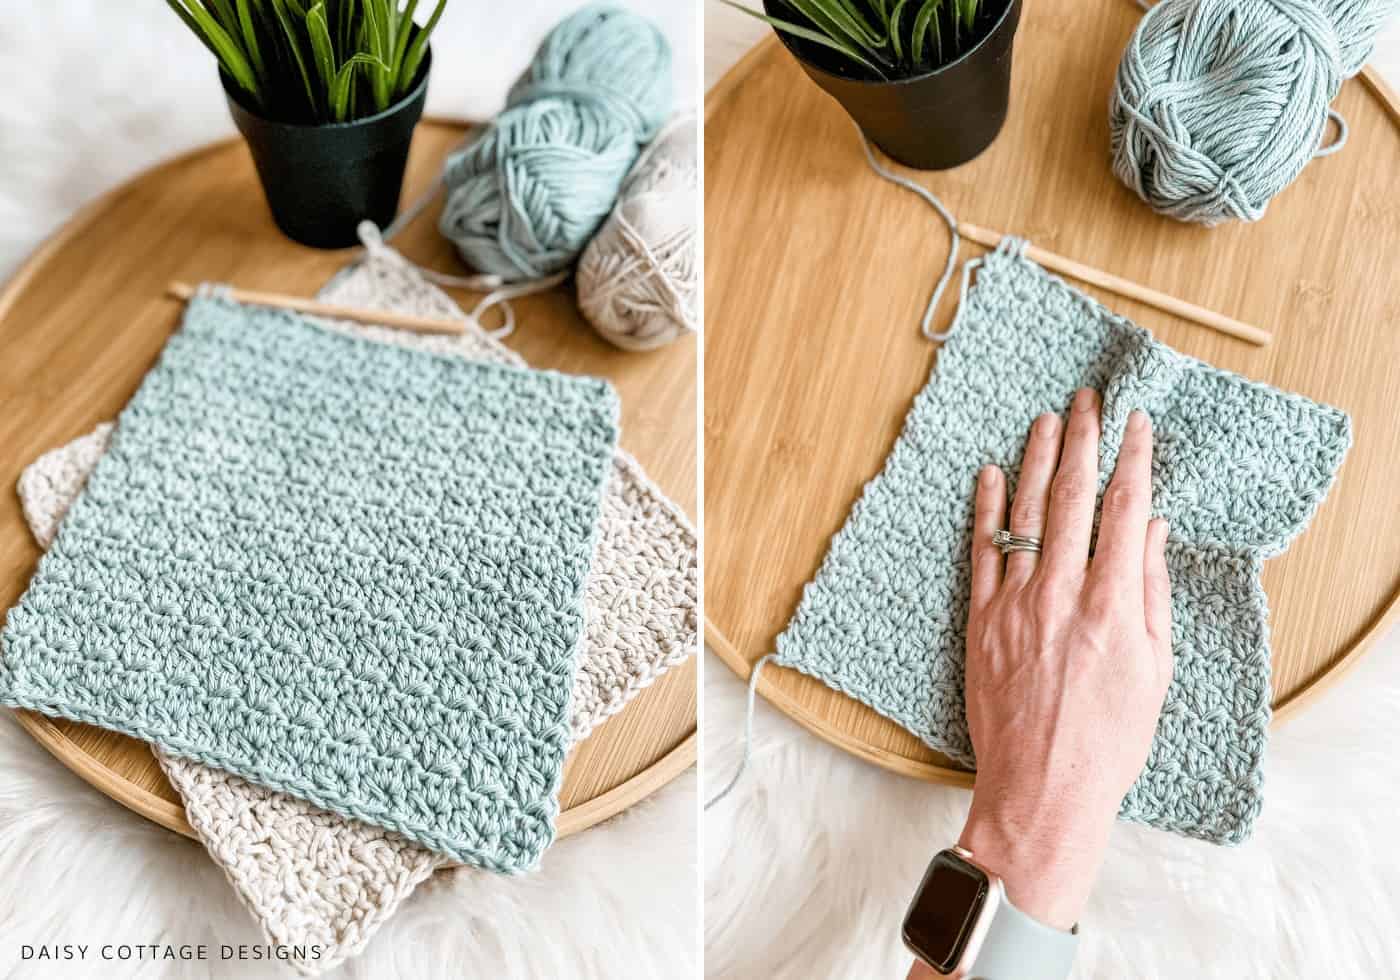 Teal and Linen dishcloth draped over a wooden tray. 